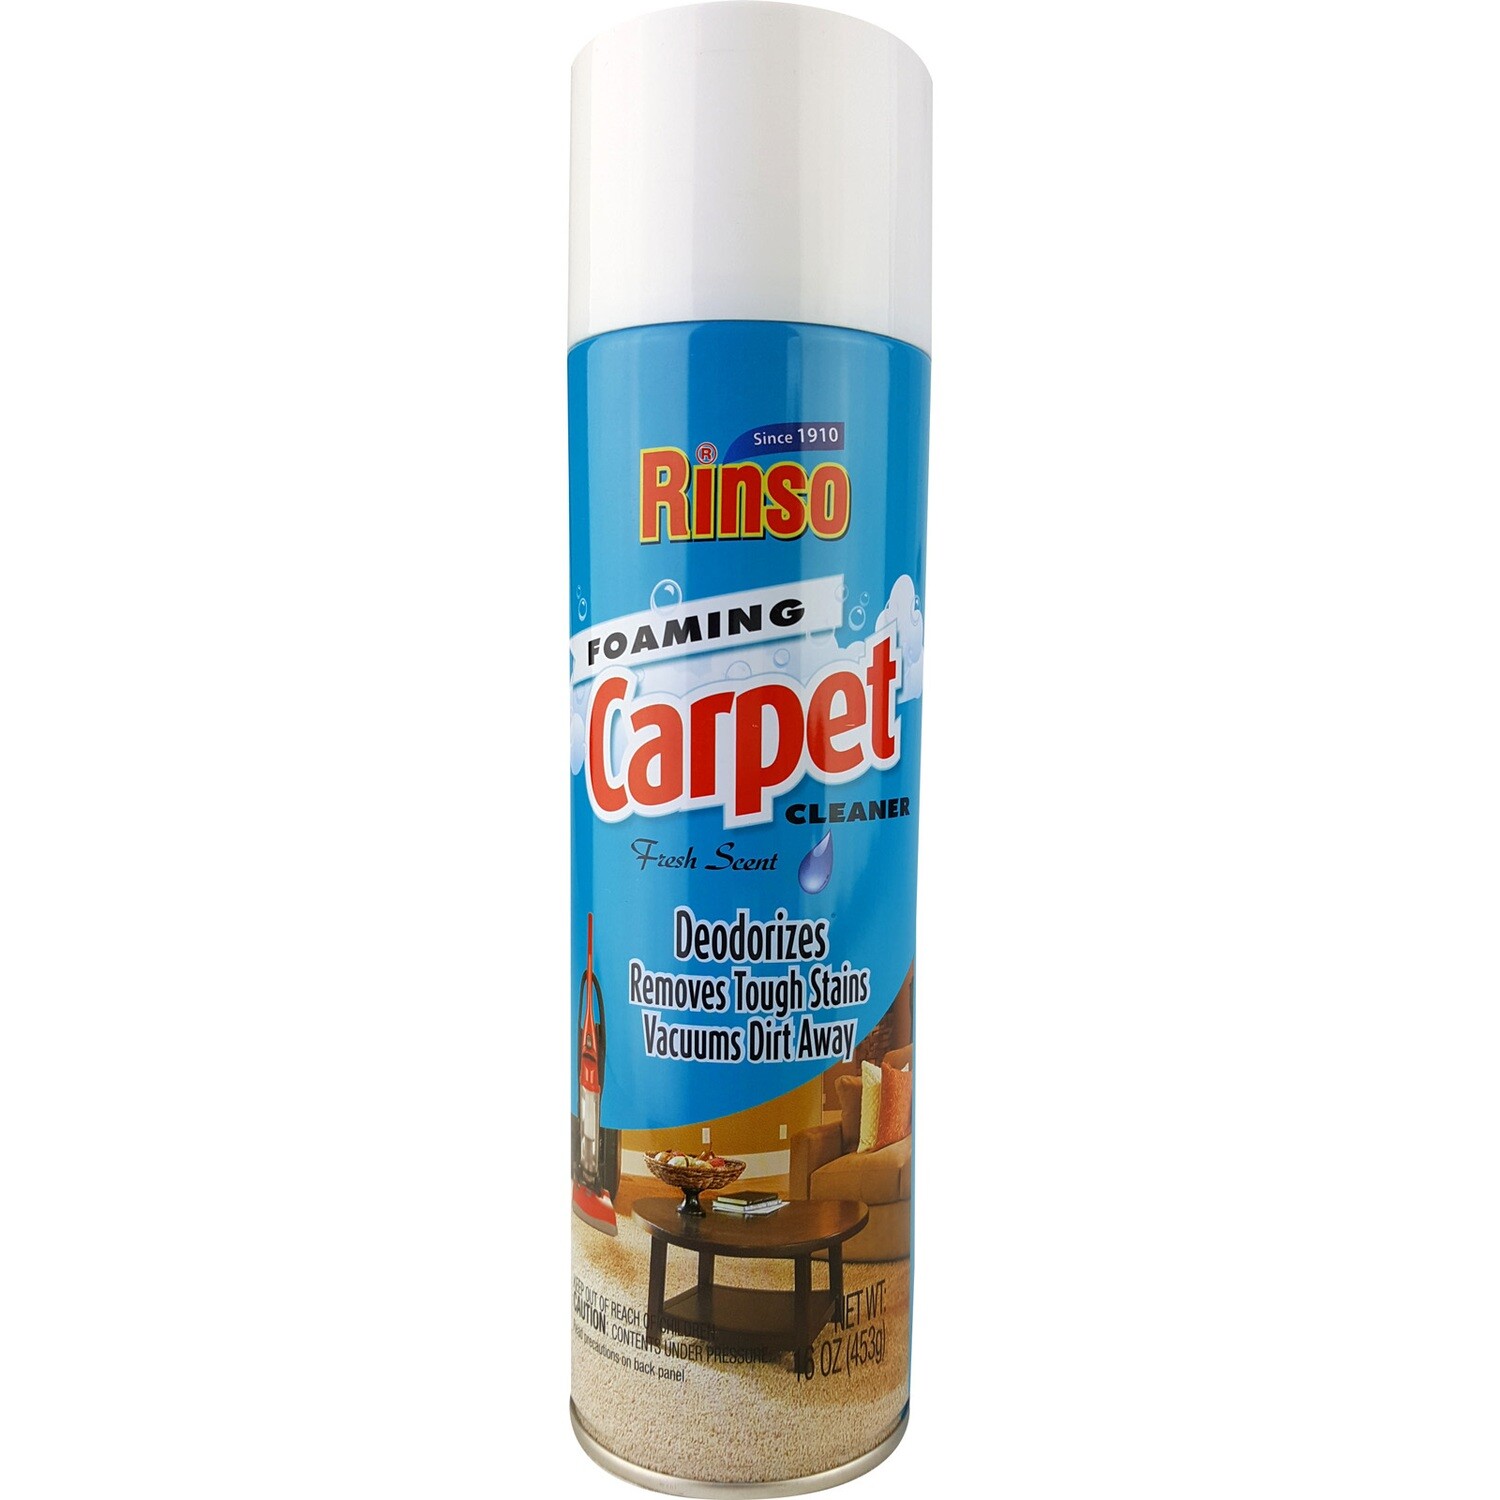 RINSO-CarpetCleanerLinen/14oz